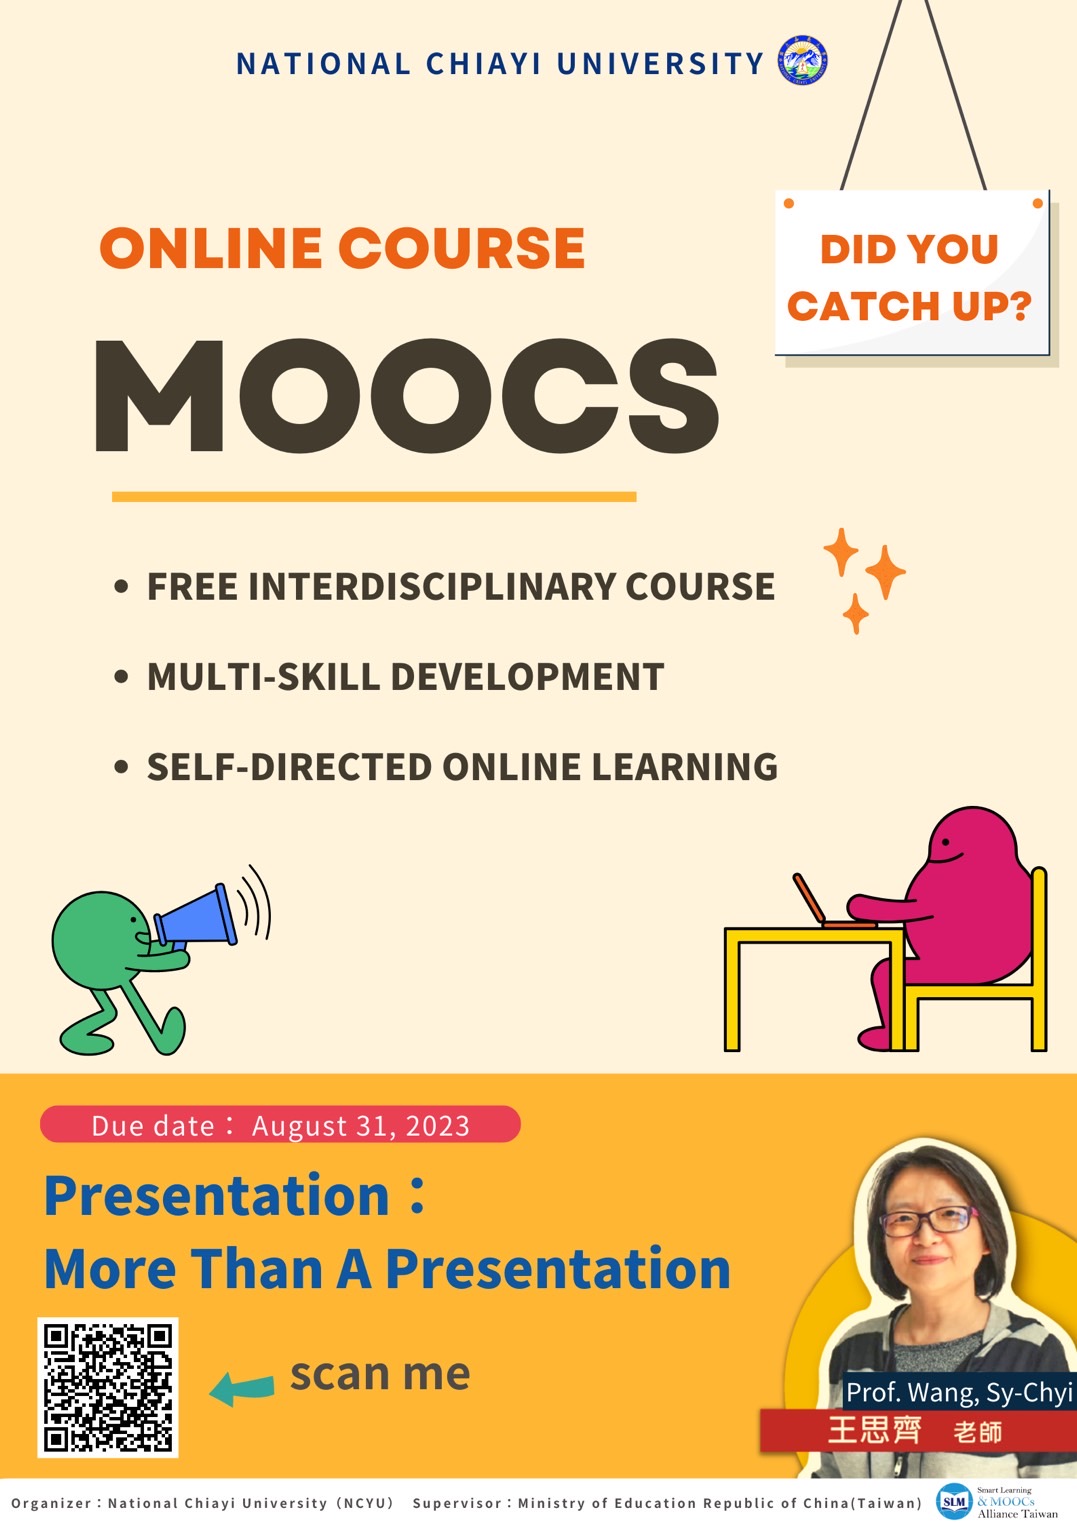 【2023.5.16】Free Online Course : A completely free MOOC course provided by National Chiayi University